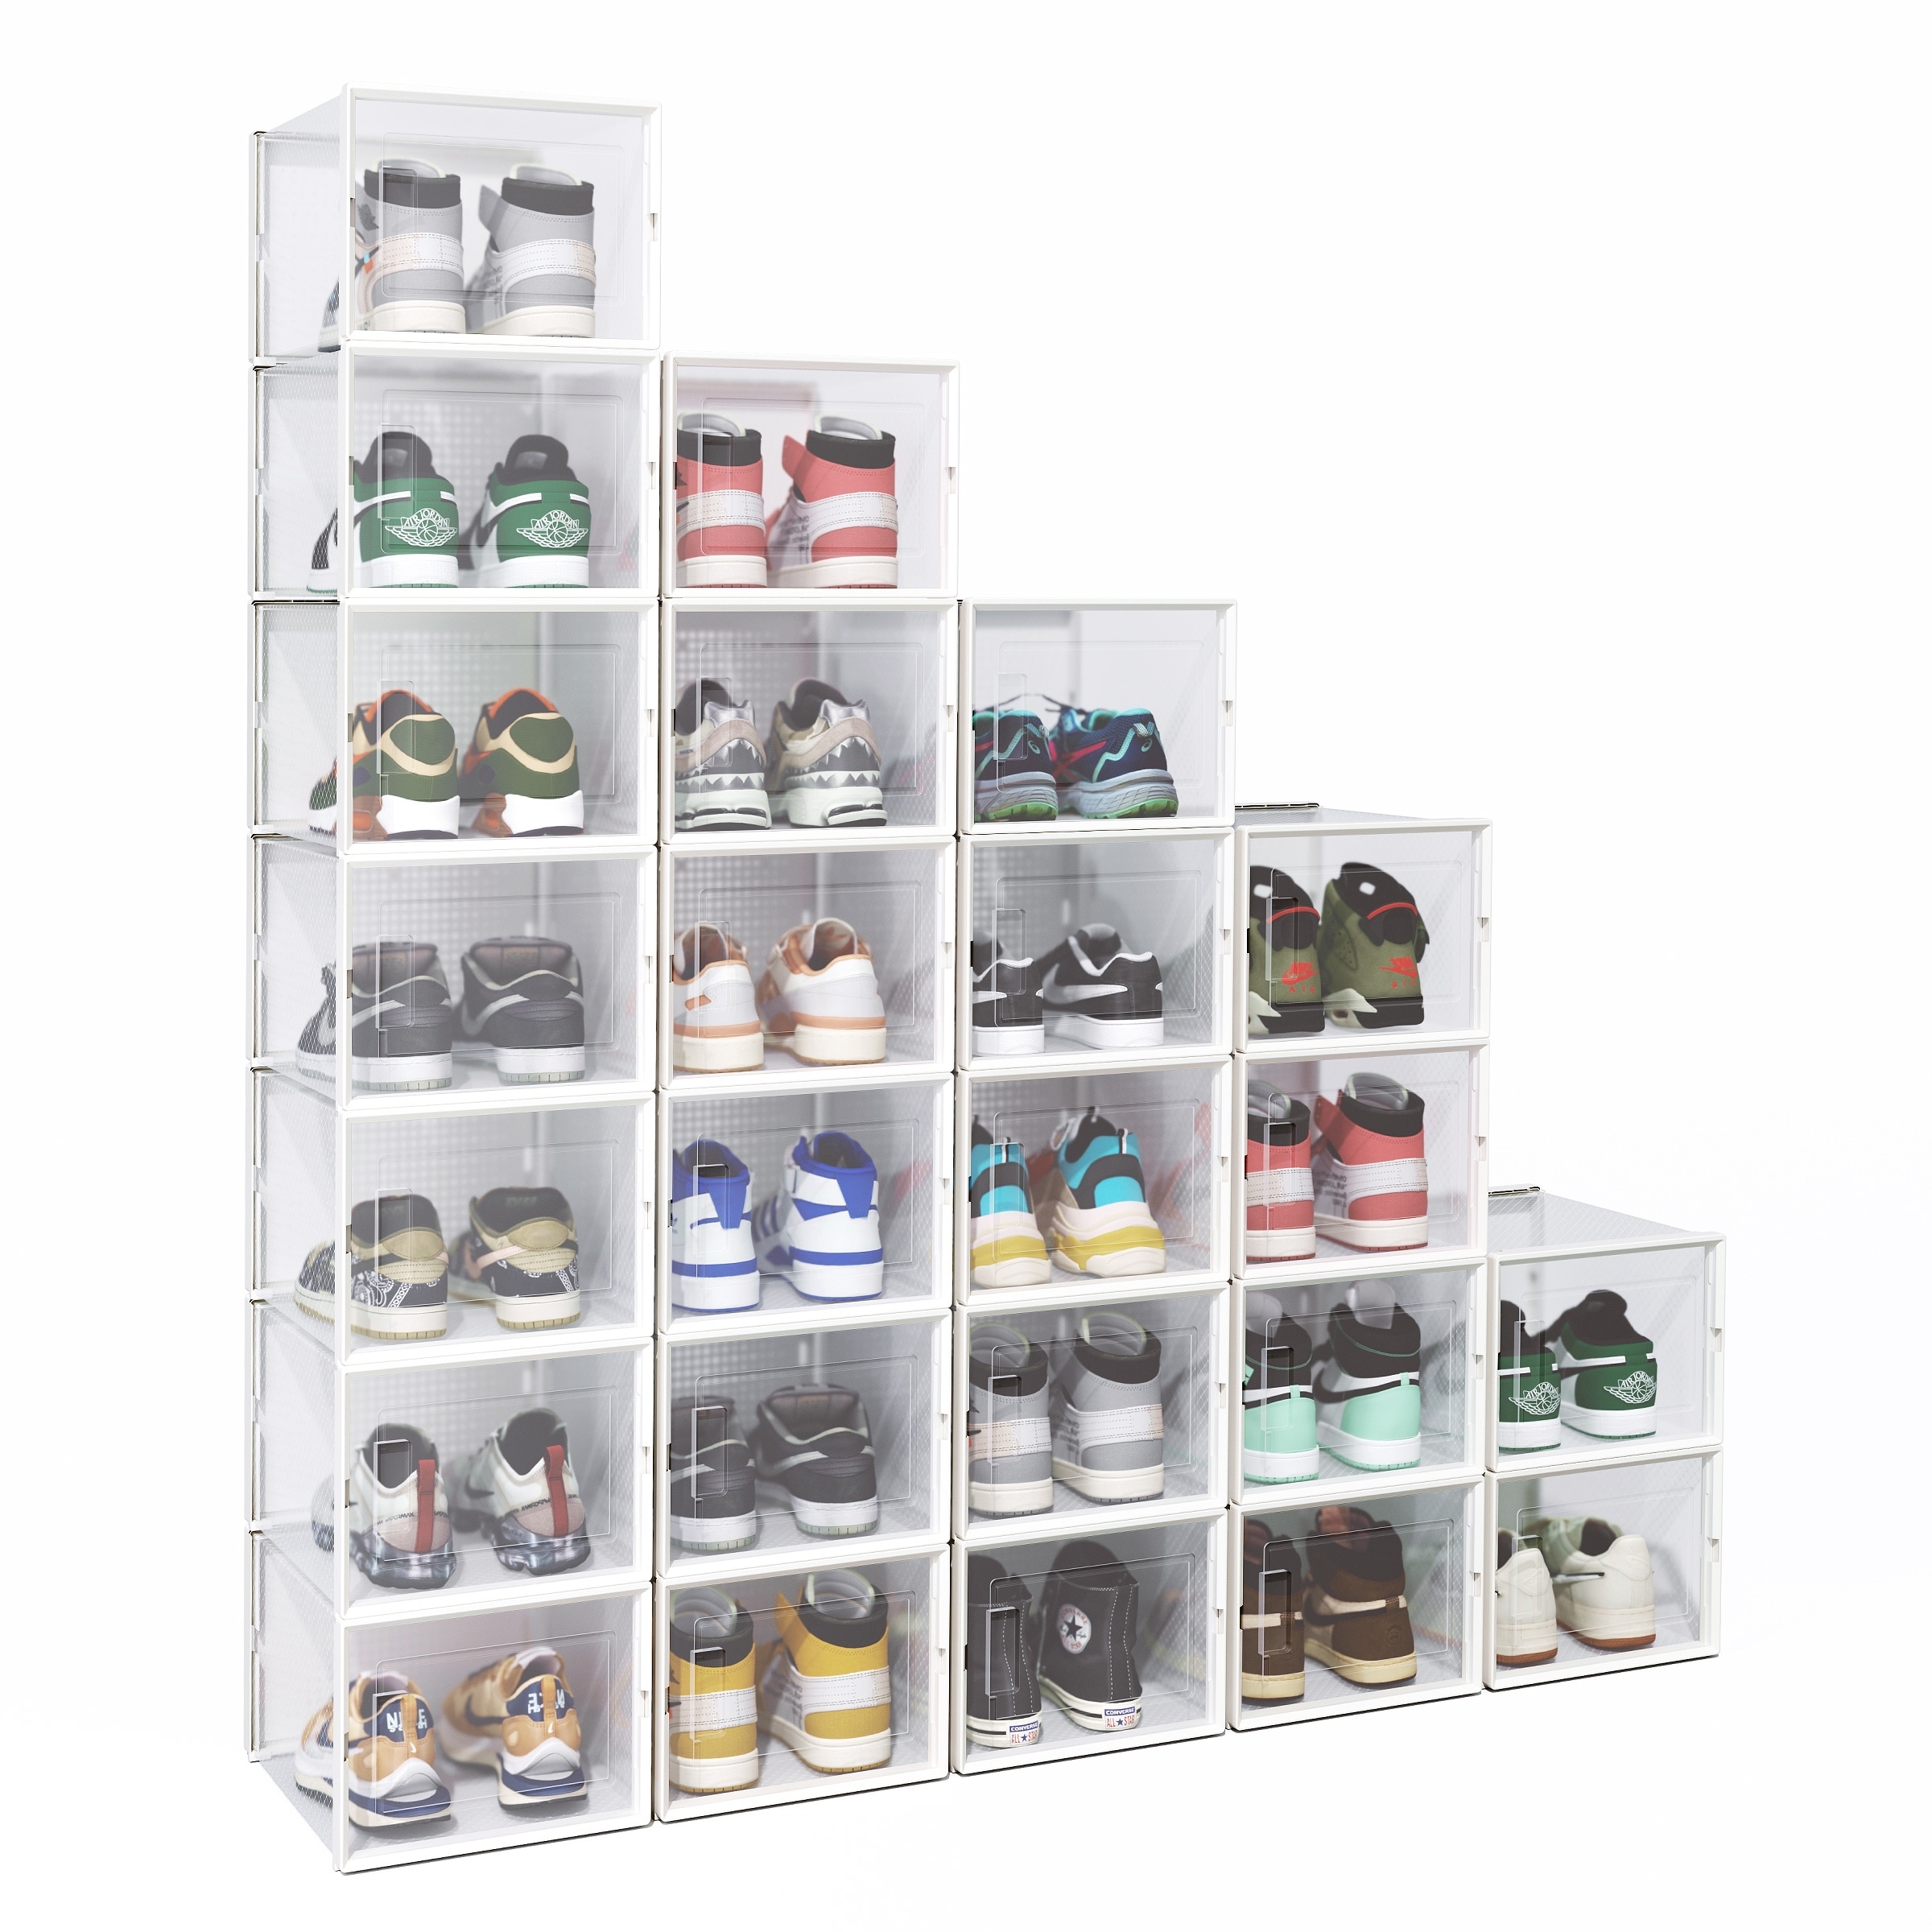 https://ak1.ostkcdn.com/images/products/is/images/direct/a2b0b1ad4381e1db904ce549768a74e3987a6246/24-Pack-Shoe-Storage-Box%2C-Plastic-Foldable-Shoe-Box%2C-Stackable-Clear-Shoe-Organizer.jpg